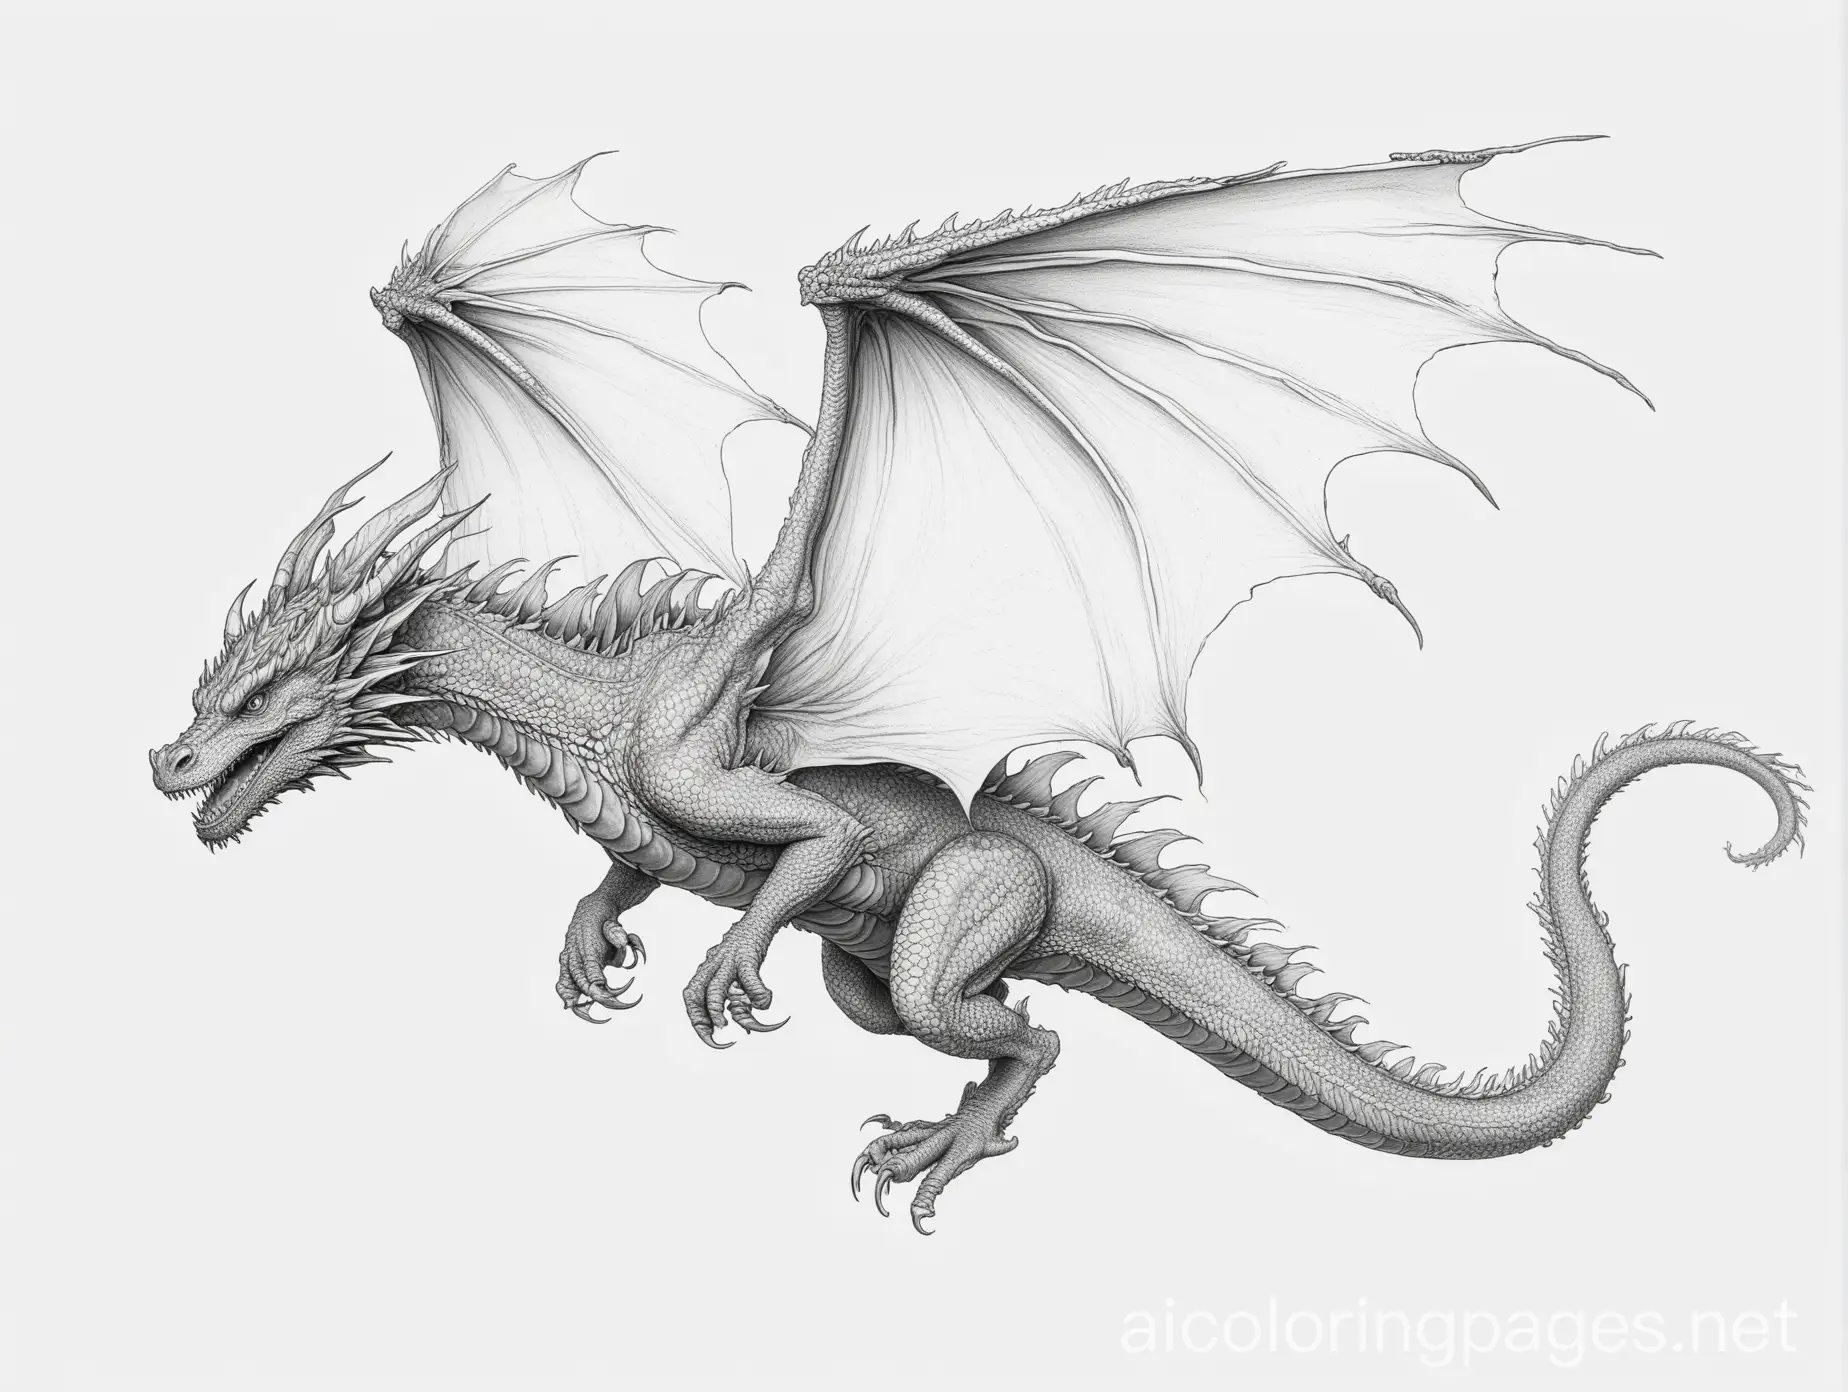 flying dragon, Coloring Page, black and white, line art, white background, Simplicity, Ample White Space. The background of the coloring page is plain white to make it easy for young children to color within the lines. The outlines of all the subjects are easy to distinguish, making it simple for kids to color without too much difficulty